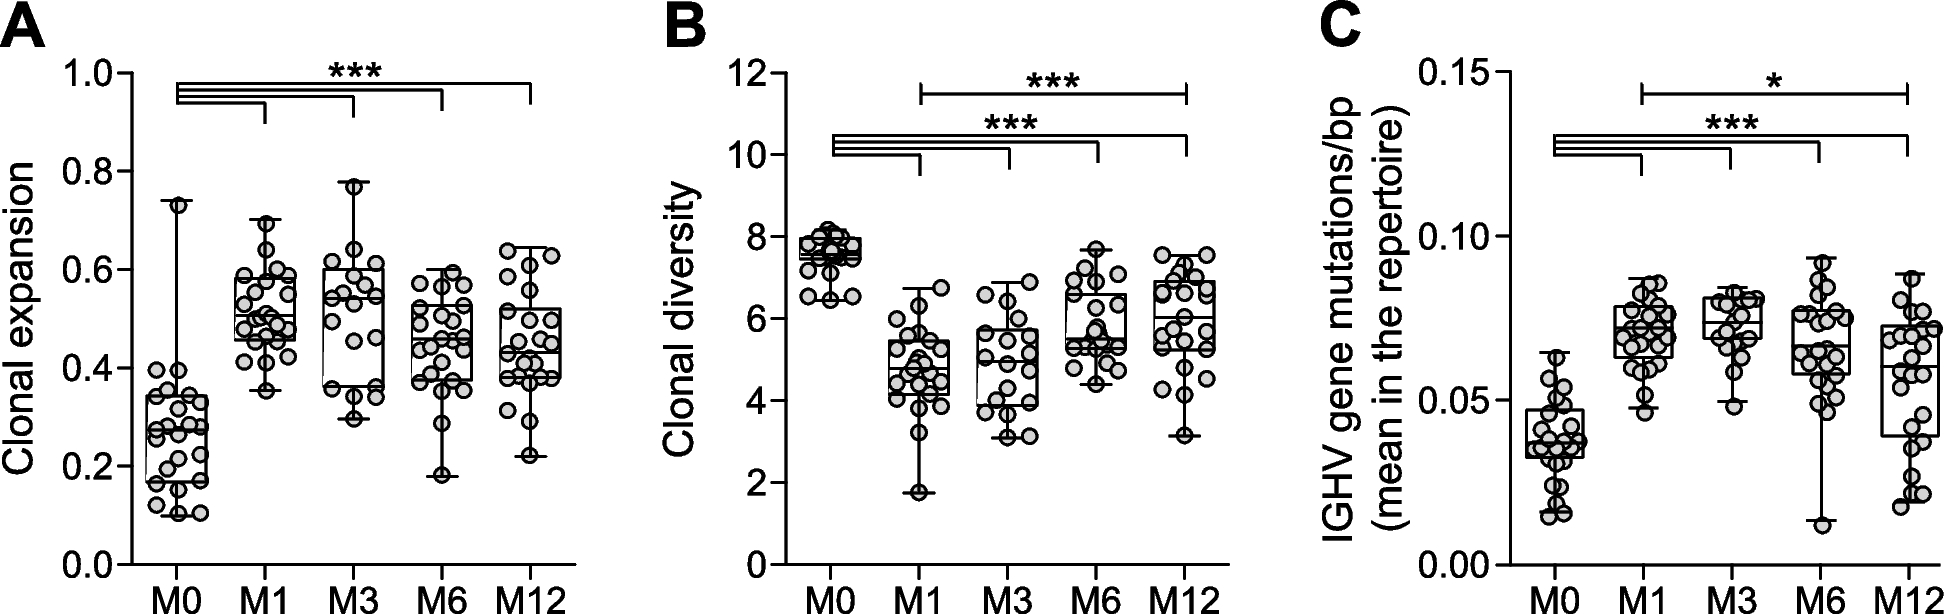 Sensitive B-cell receptor repertoire analysis shows repopulation correlates with clinical response to rituximab in rheumatoid arthritis